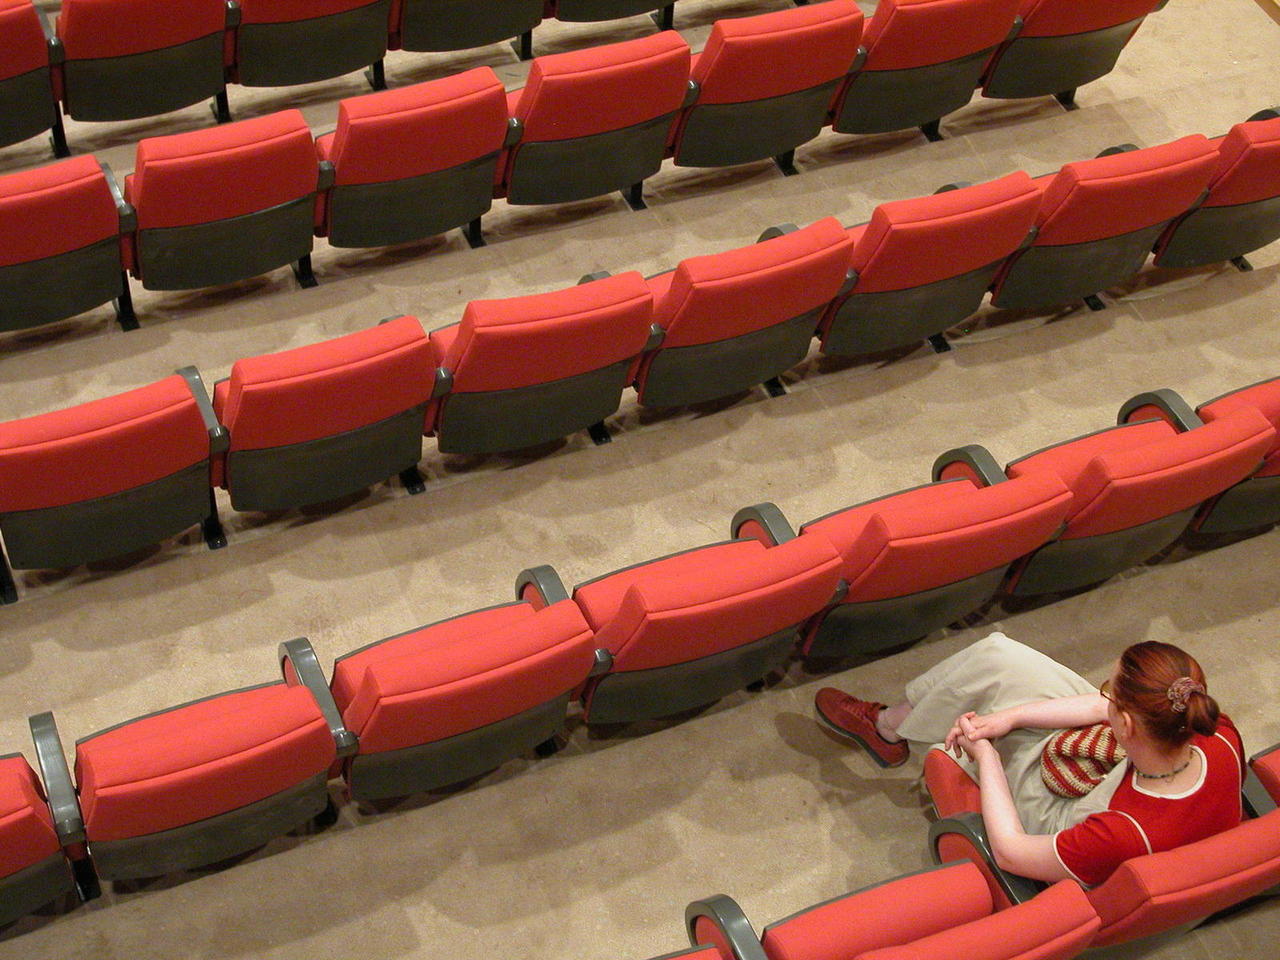 An empty theater